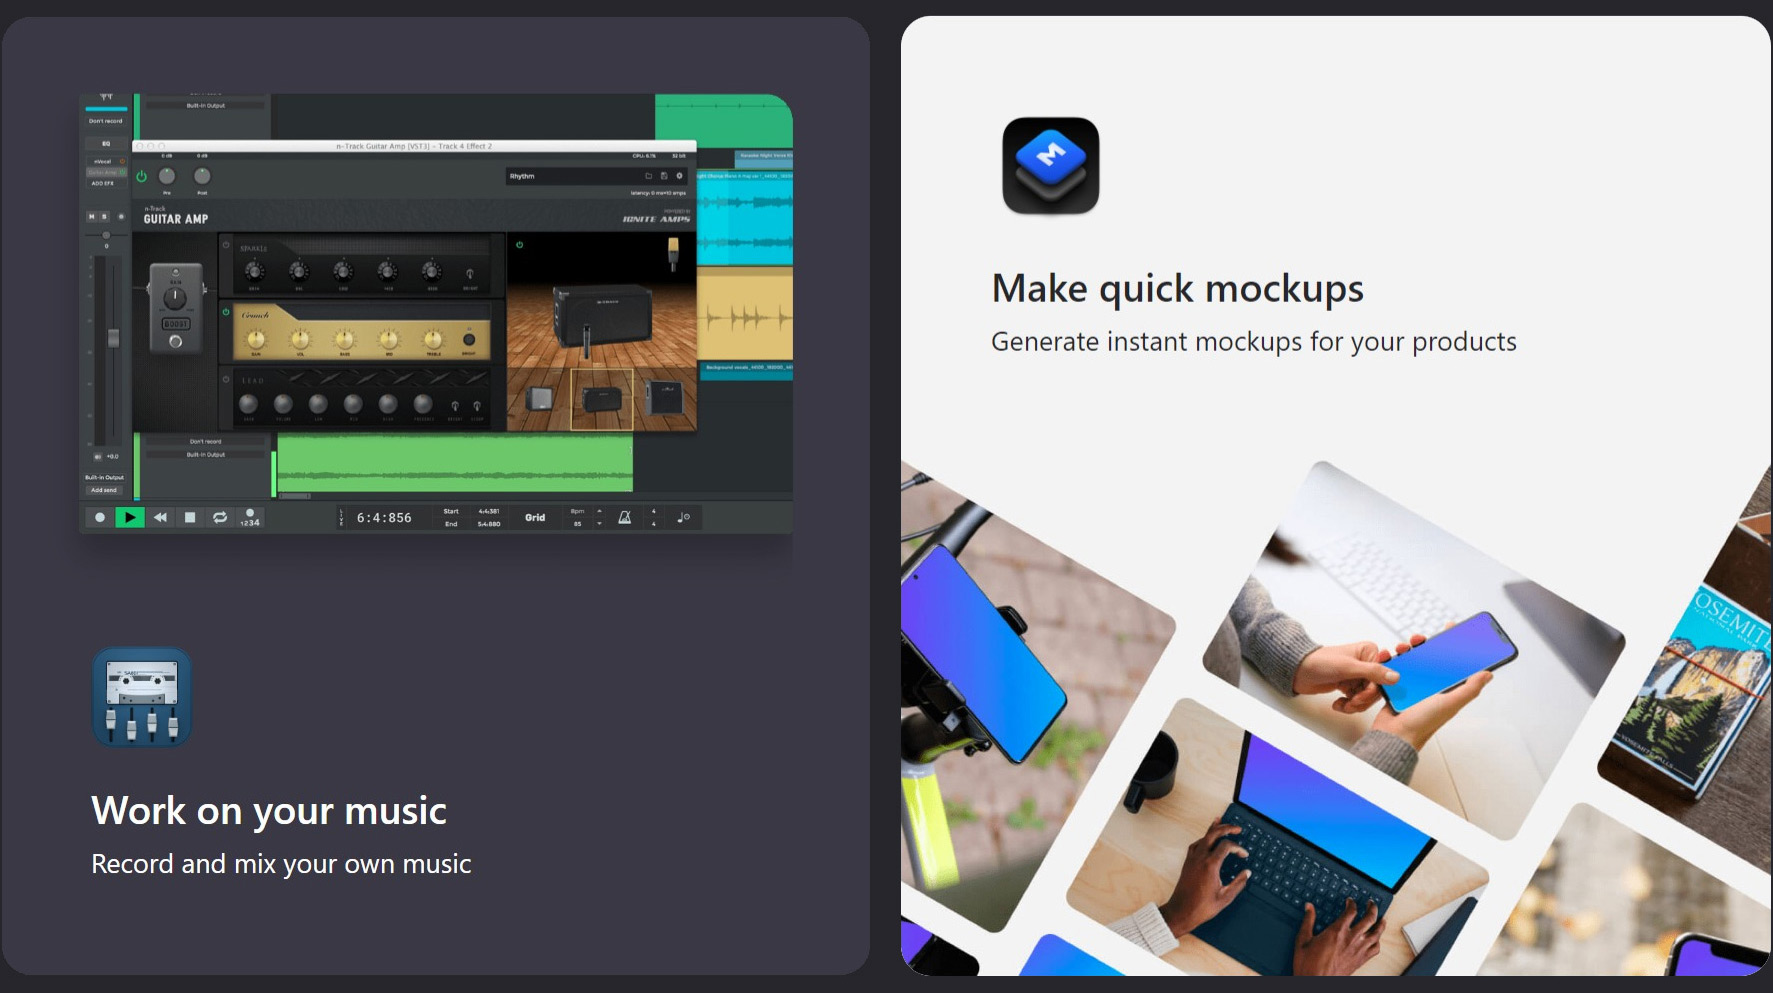 Work on your music | Make quick mockups